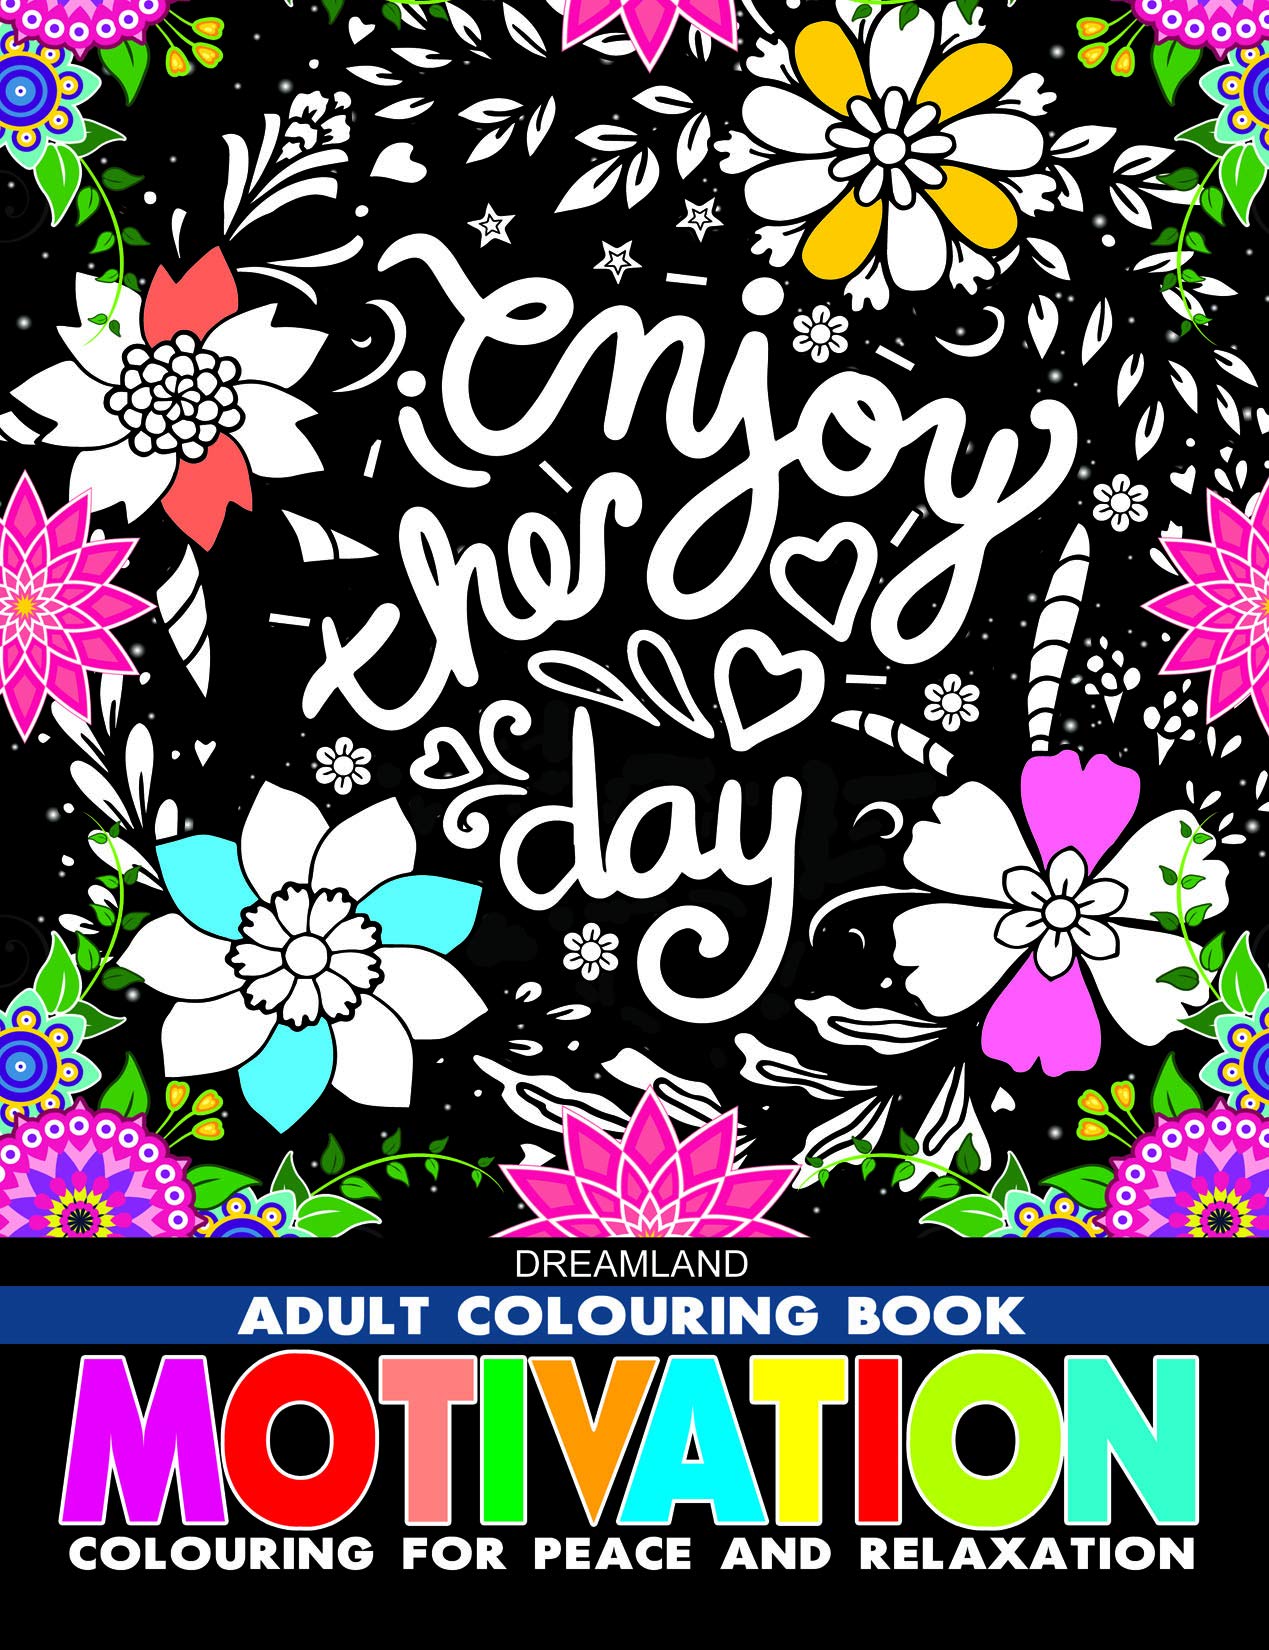 Motivation - Adult Colouring Book for Peace & Relaxation